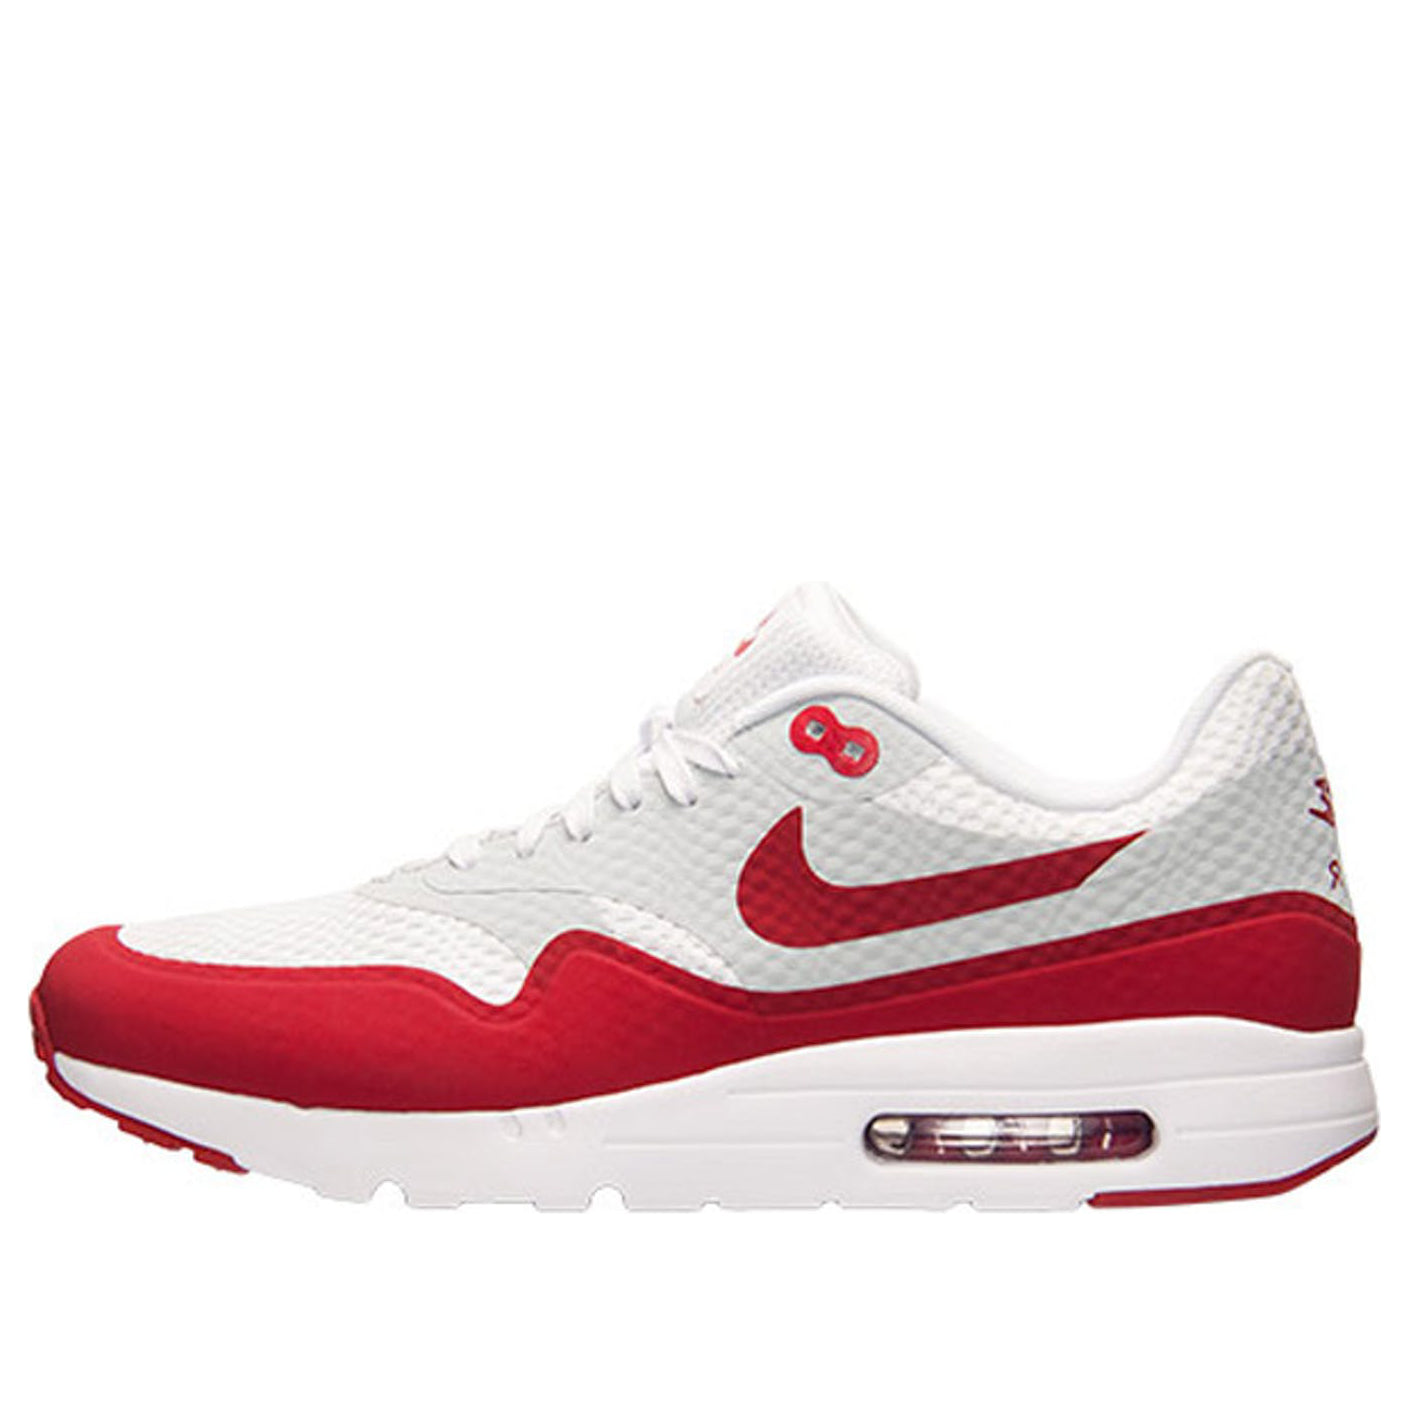 Nike Air Max 1 Ultra Essential White Varsity Red 819476-106 KICKSOVER